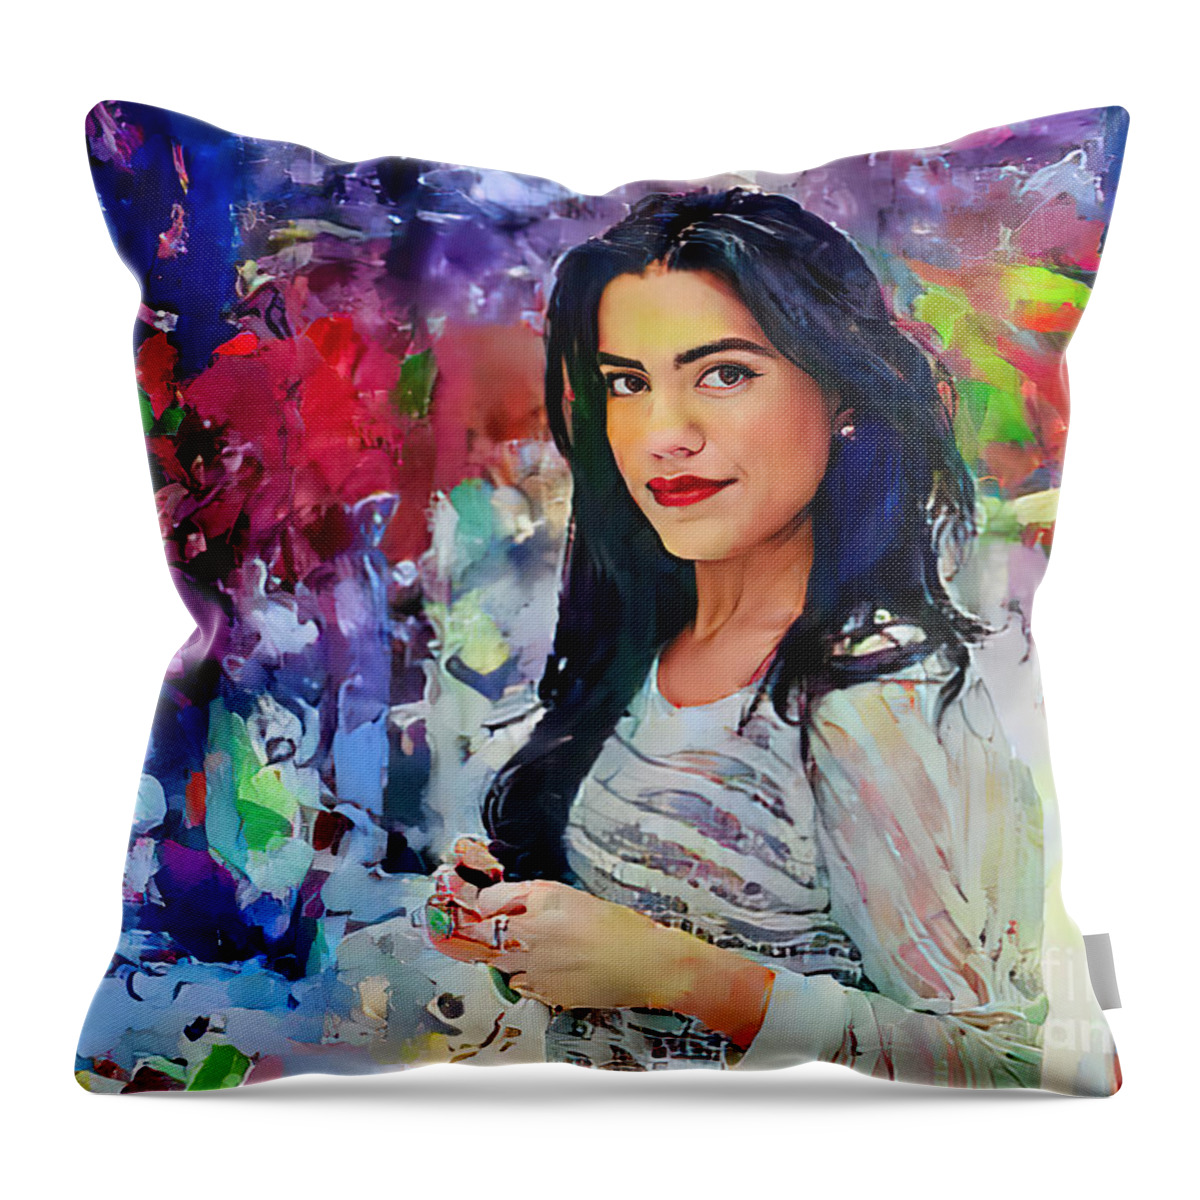 Dreamscopeapp Throw Pillow featuring the photograph Dreamscope Beauty by Jack Torcello